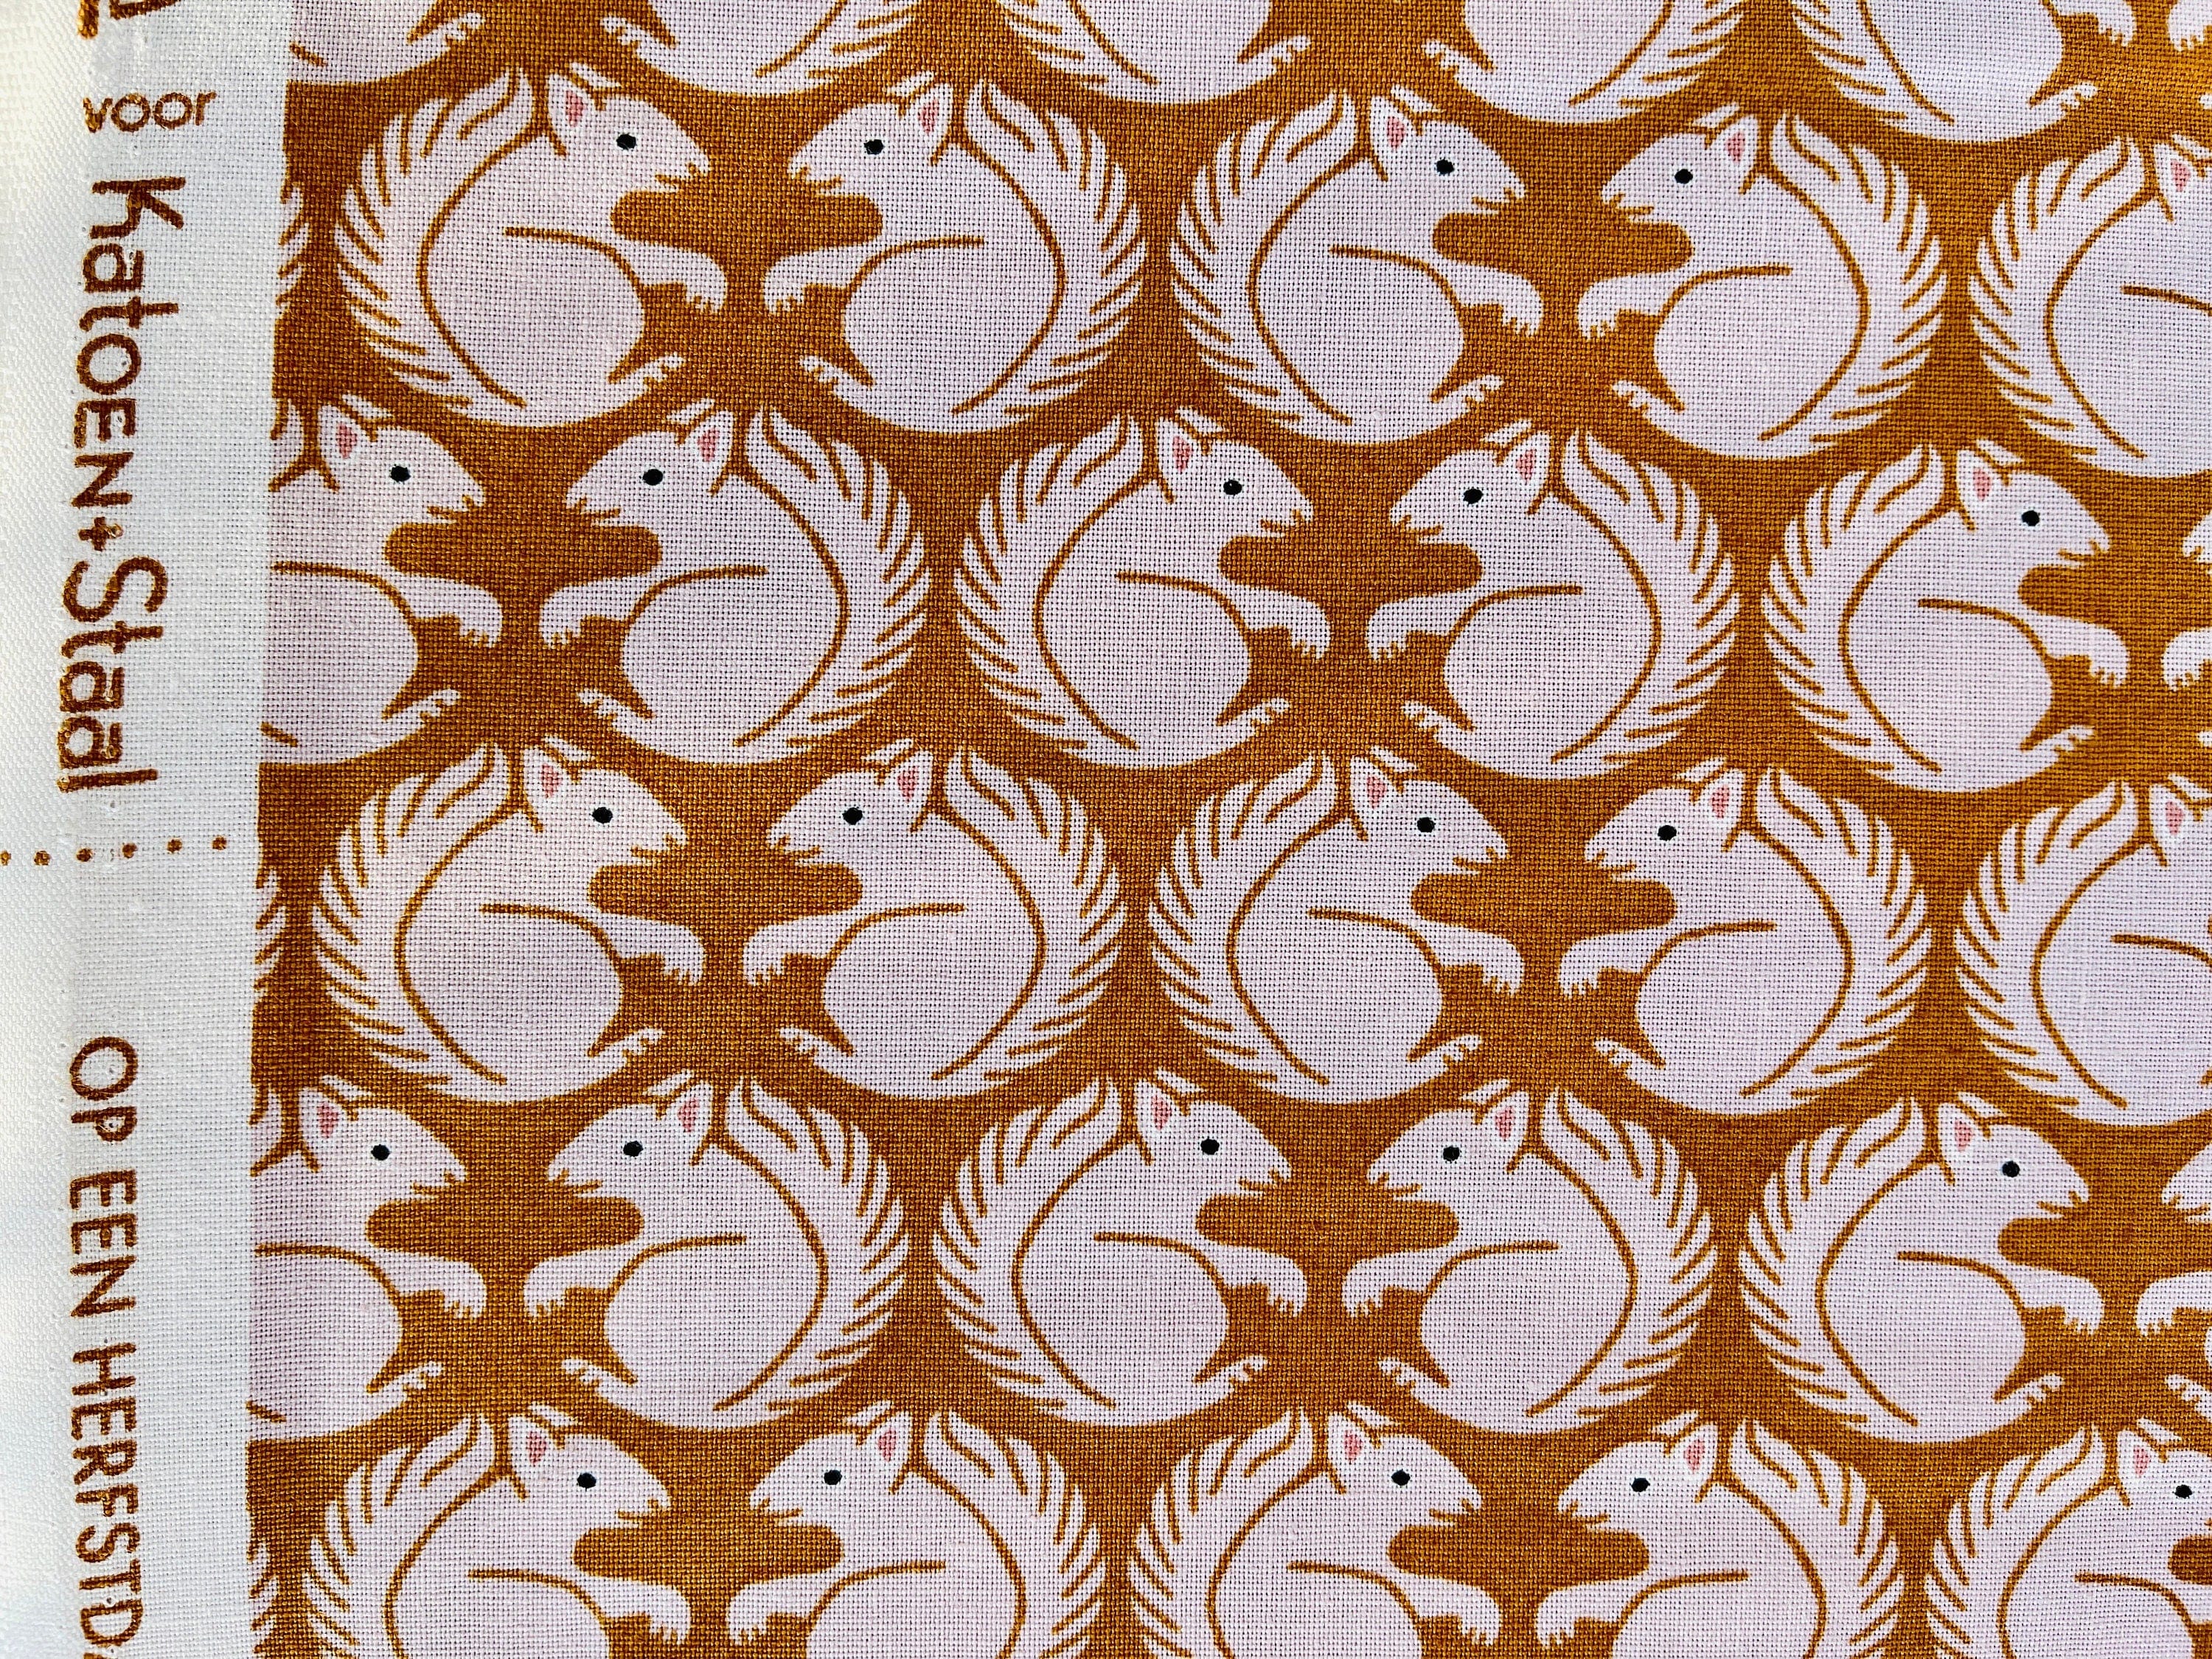 On a Fall  Day - Squirrel - Gold Fabric - Loes Van Oosten - Cotton+Steel - LV702-GO1